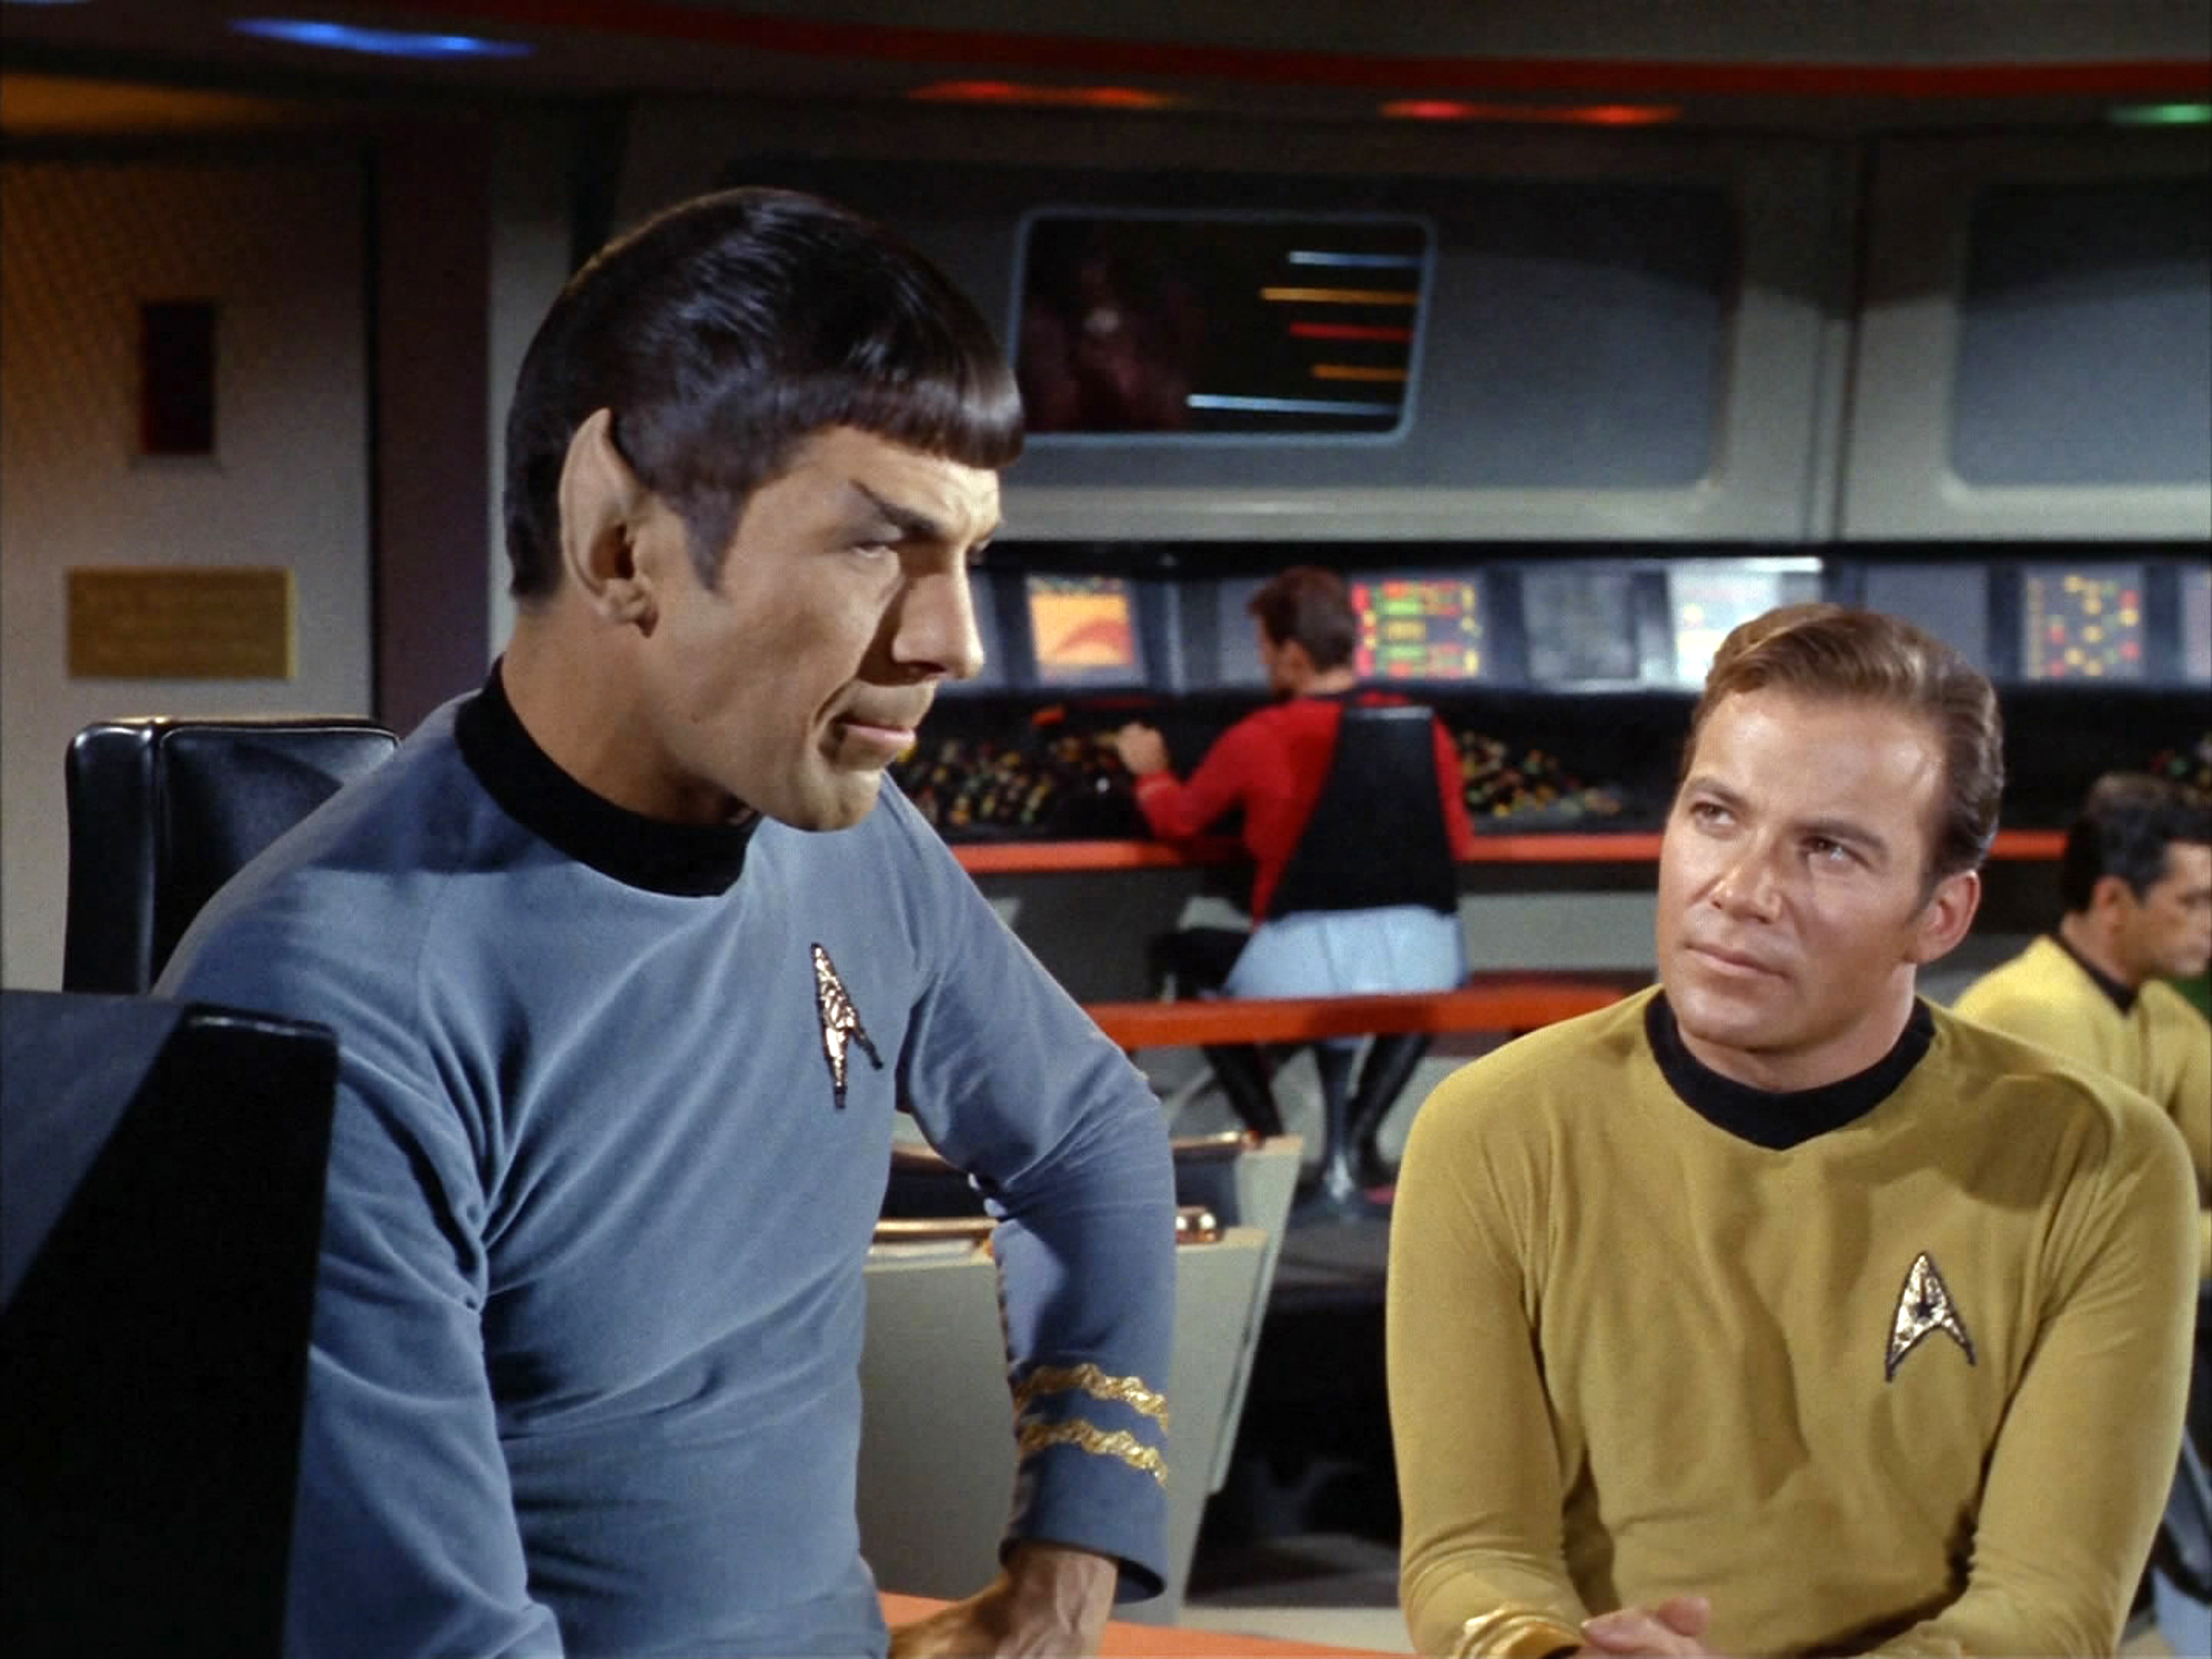 Leonard Nimoy as Commander Spock and William Shatner as Captain James T. Kirk on the bridge of the USS Enterprise on Star Trek: The Original Series on Feb. 16, 1967. (CBS Photo Archive/Getty Images)